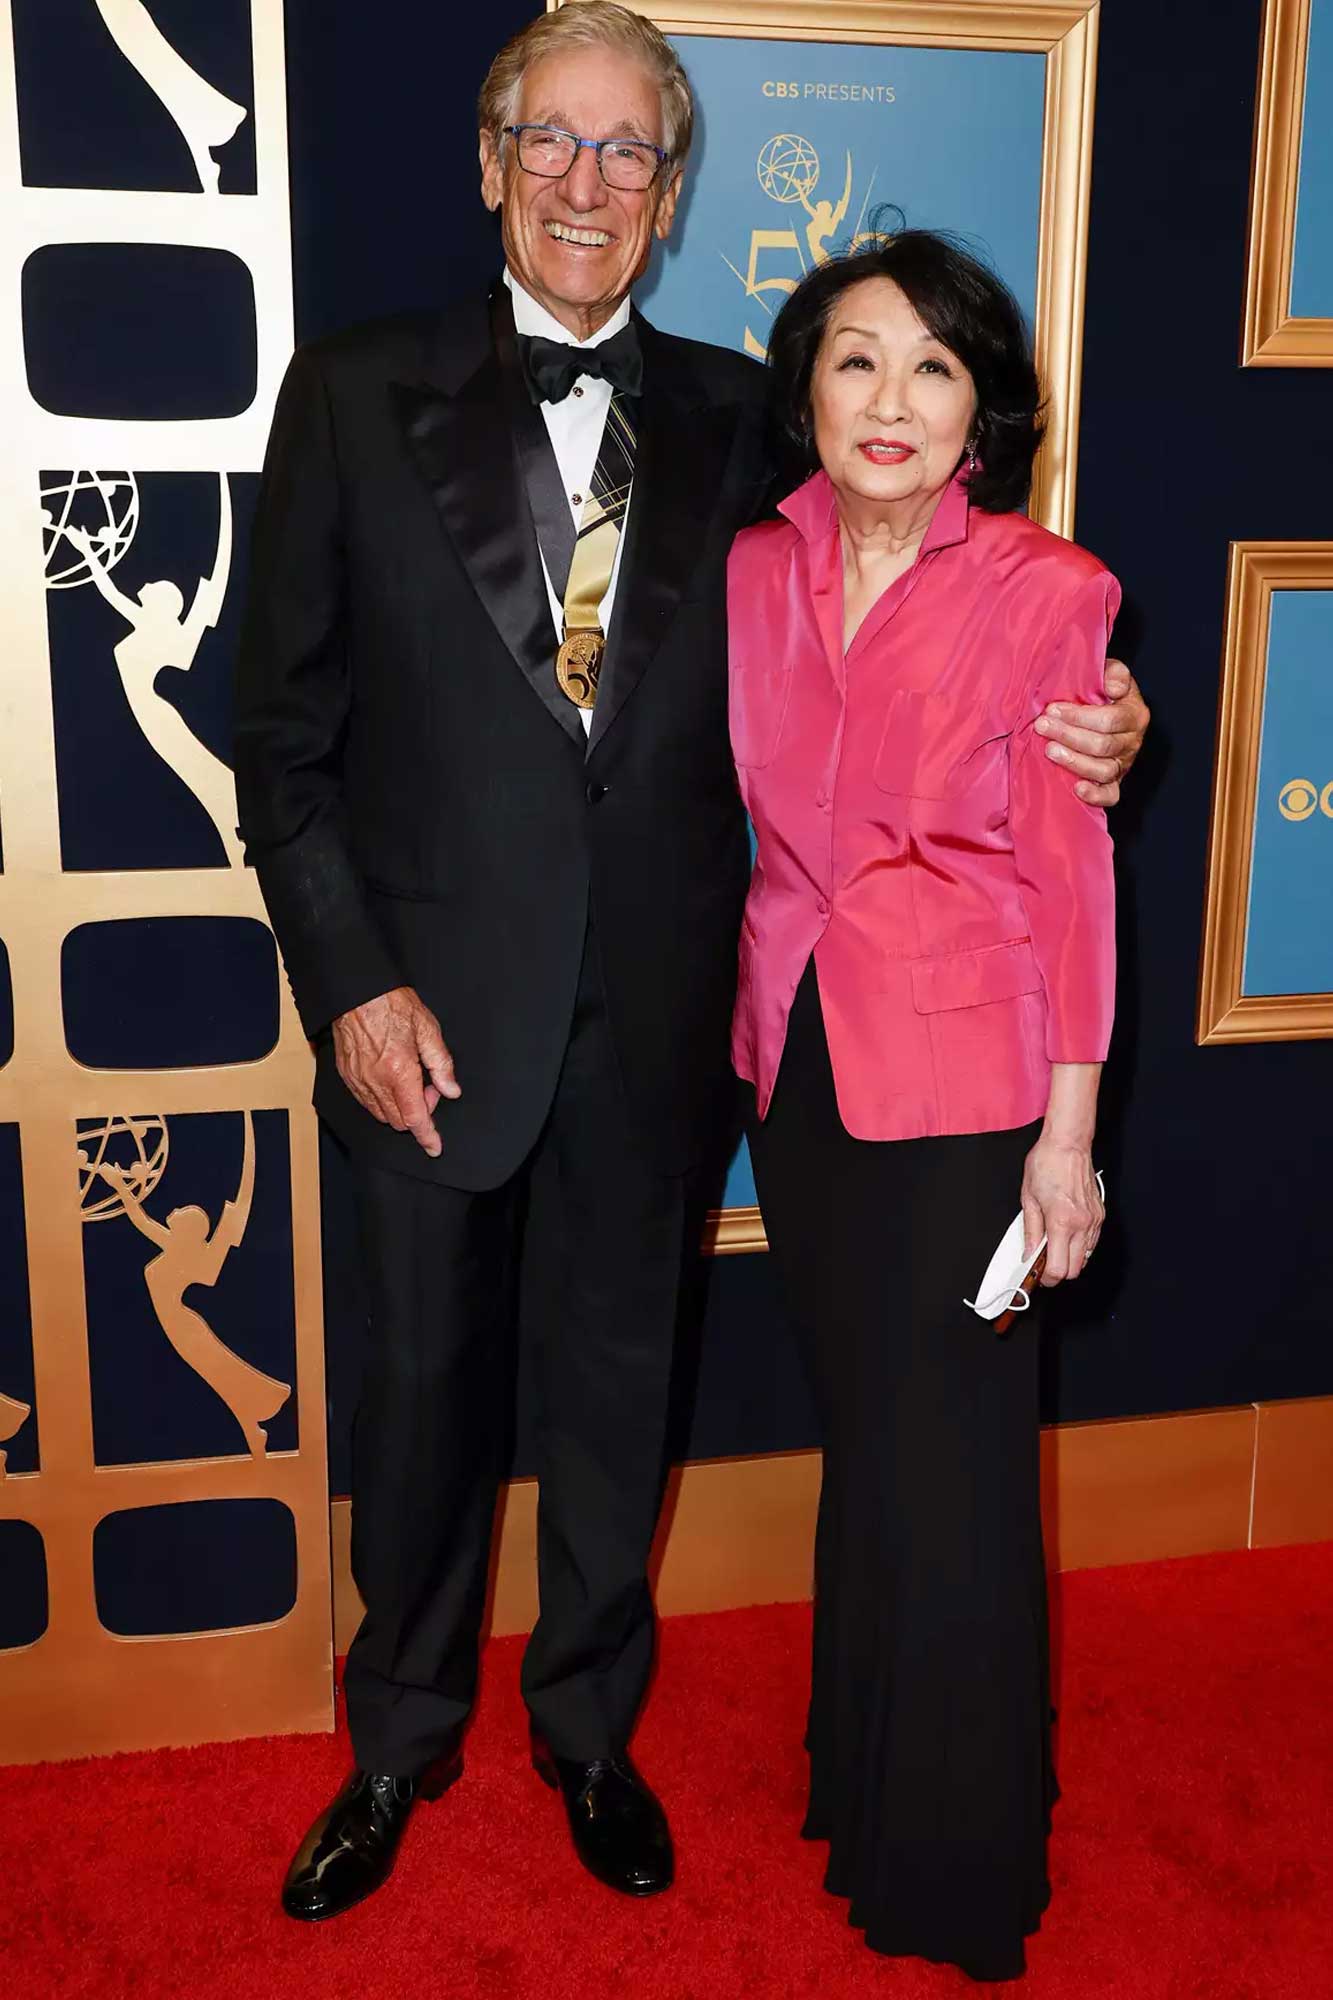 Maury Povich with his wife Connie Chung